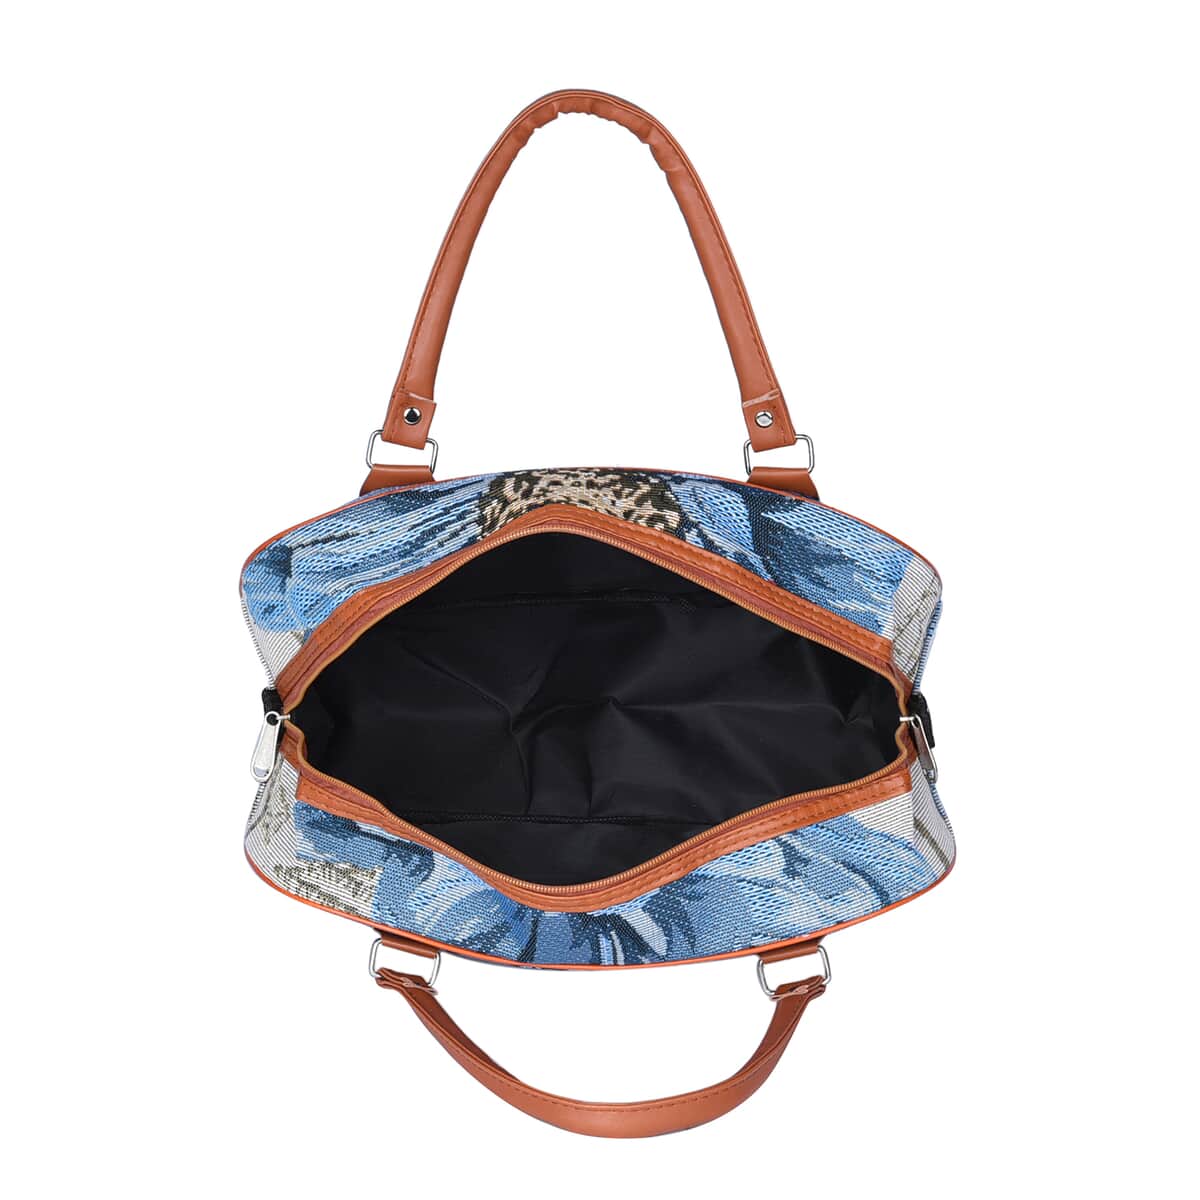 Off White and Blue Flower Pattern Jute Travel Bag (14.17"x5.9"x9.06") with 38 Inches Shoulder Strap image number 5